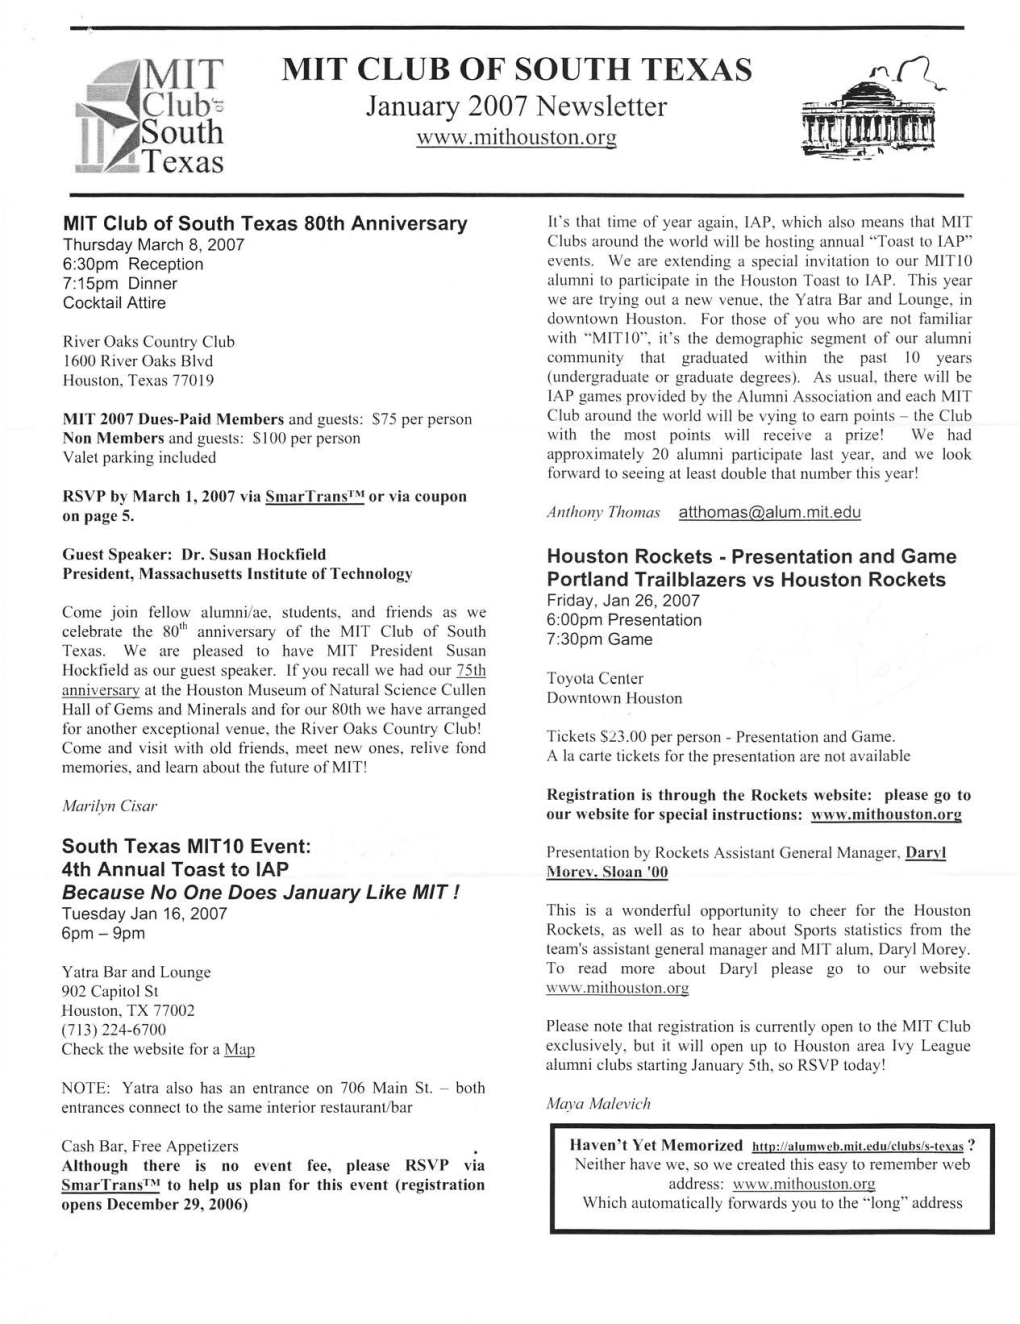 2007 Newsletter South Texas